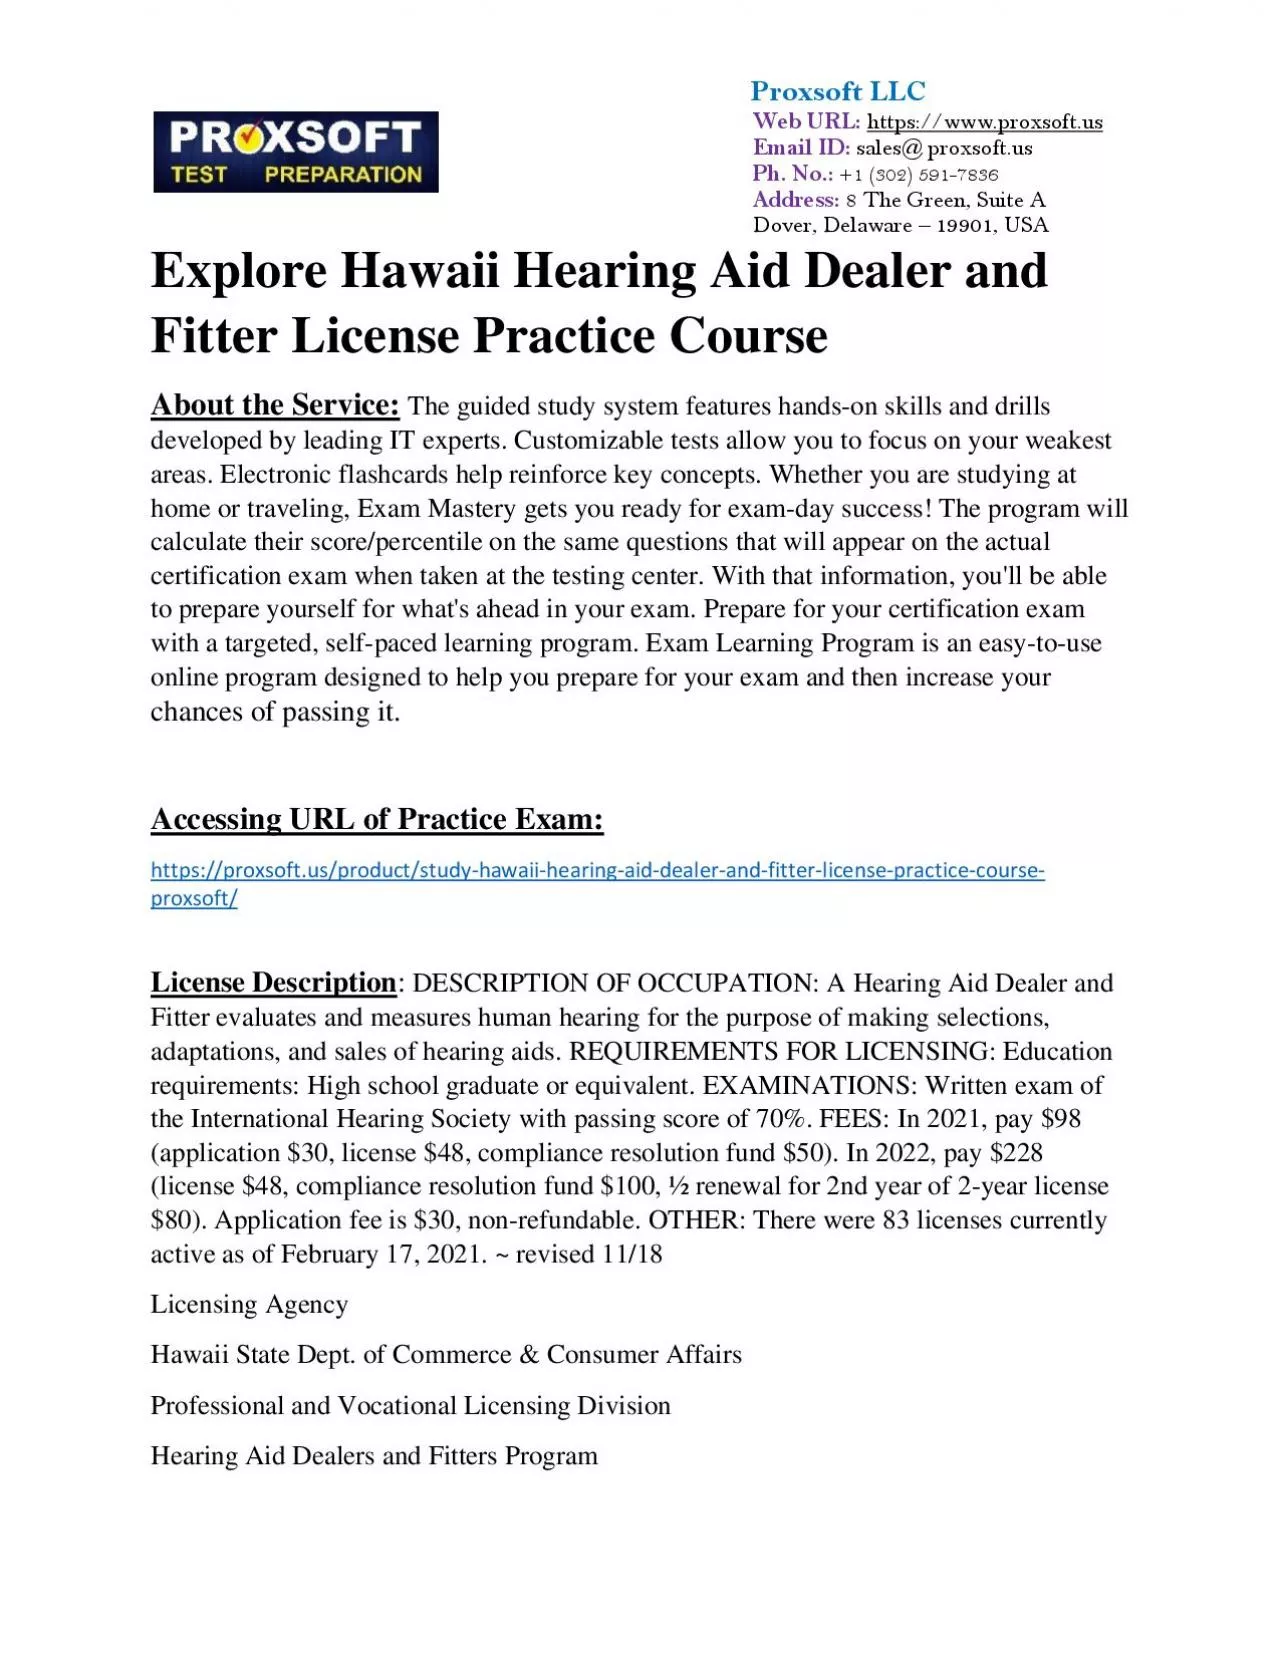 Explore Hawaii Hearing Aid Dealer and Fitter License Practice Course